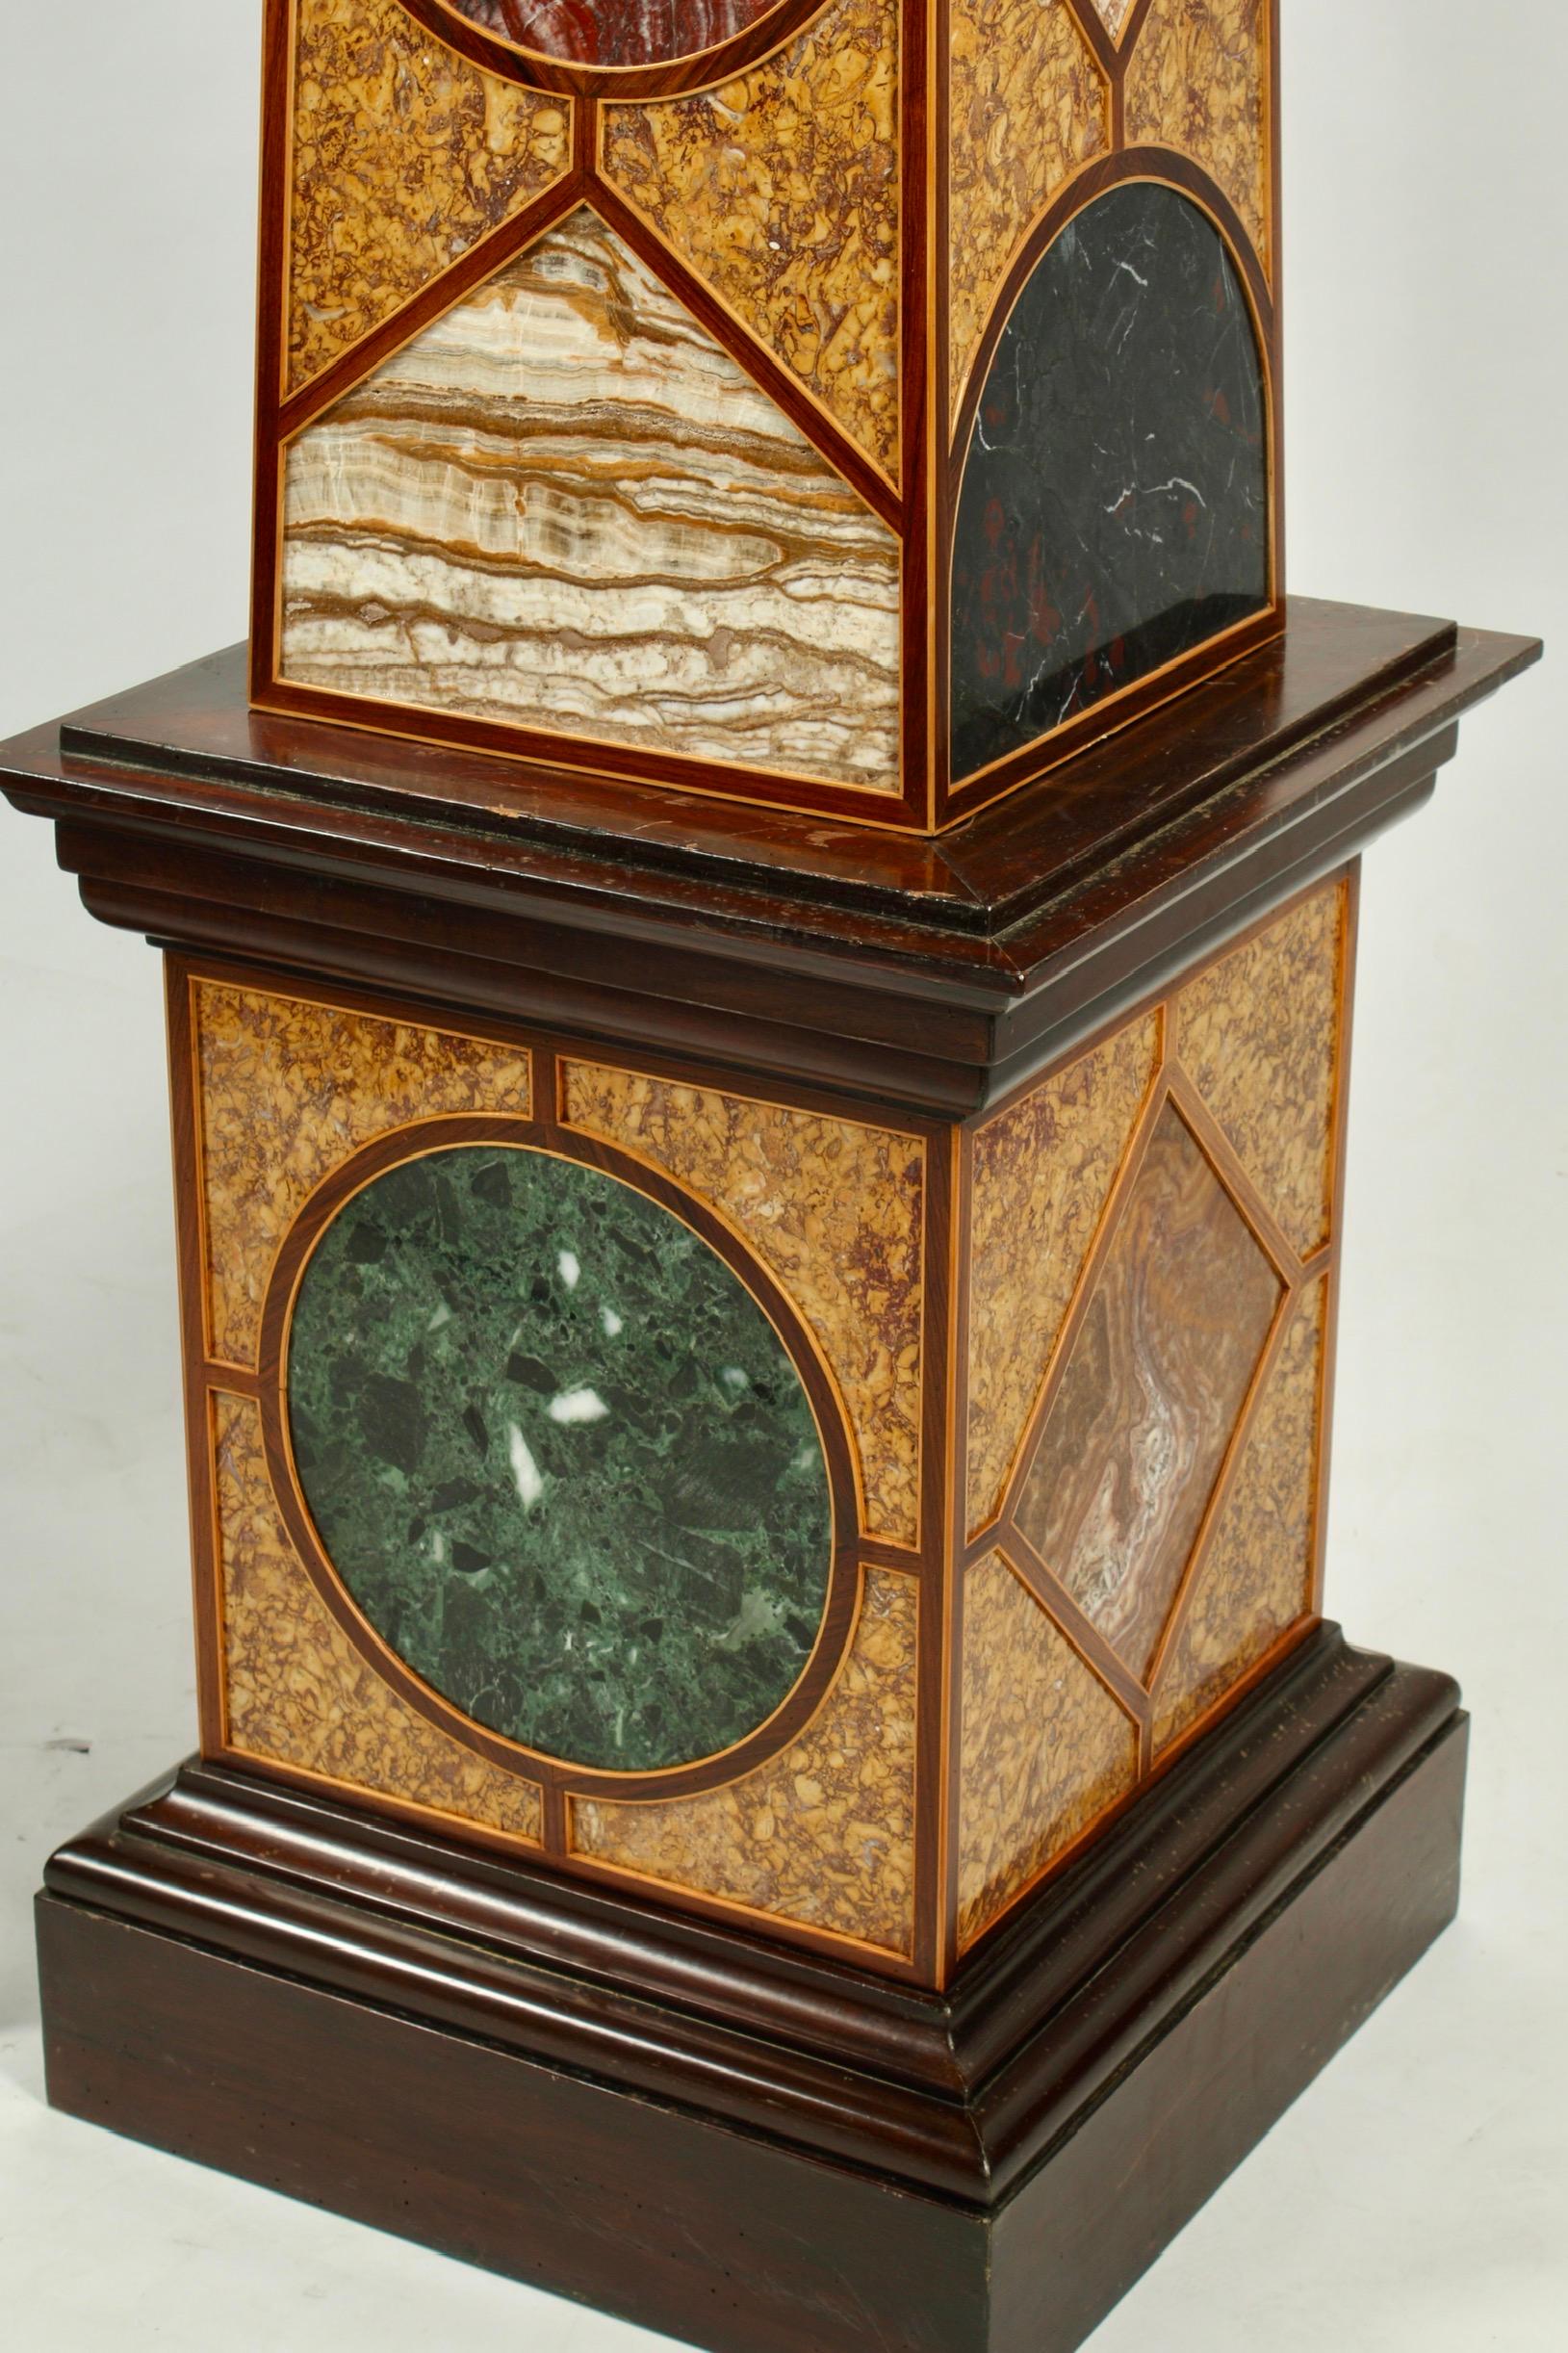 Unique monumental Italian 19th Century Grand Tour Style Specimen marble inlaid obelisks. Marble is precisely cut and inlaid into a fine two-toned wood veneer border. The artist spares no attention to detail by meticulously matching the marble inlays